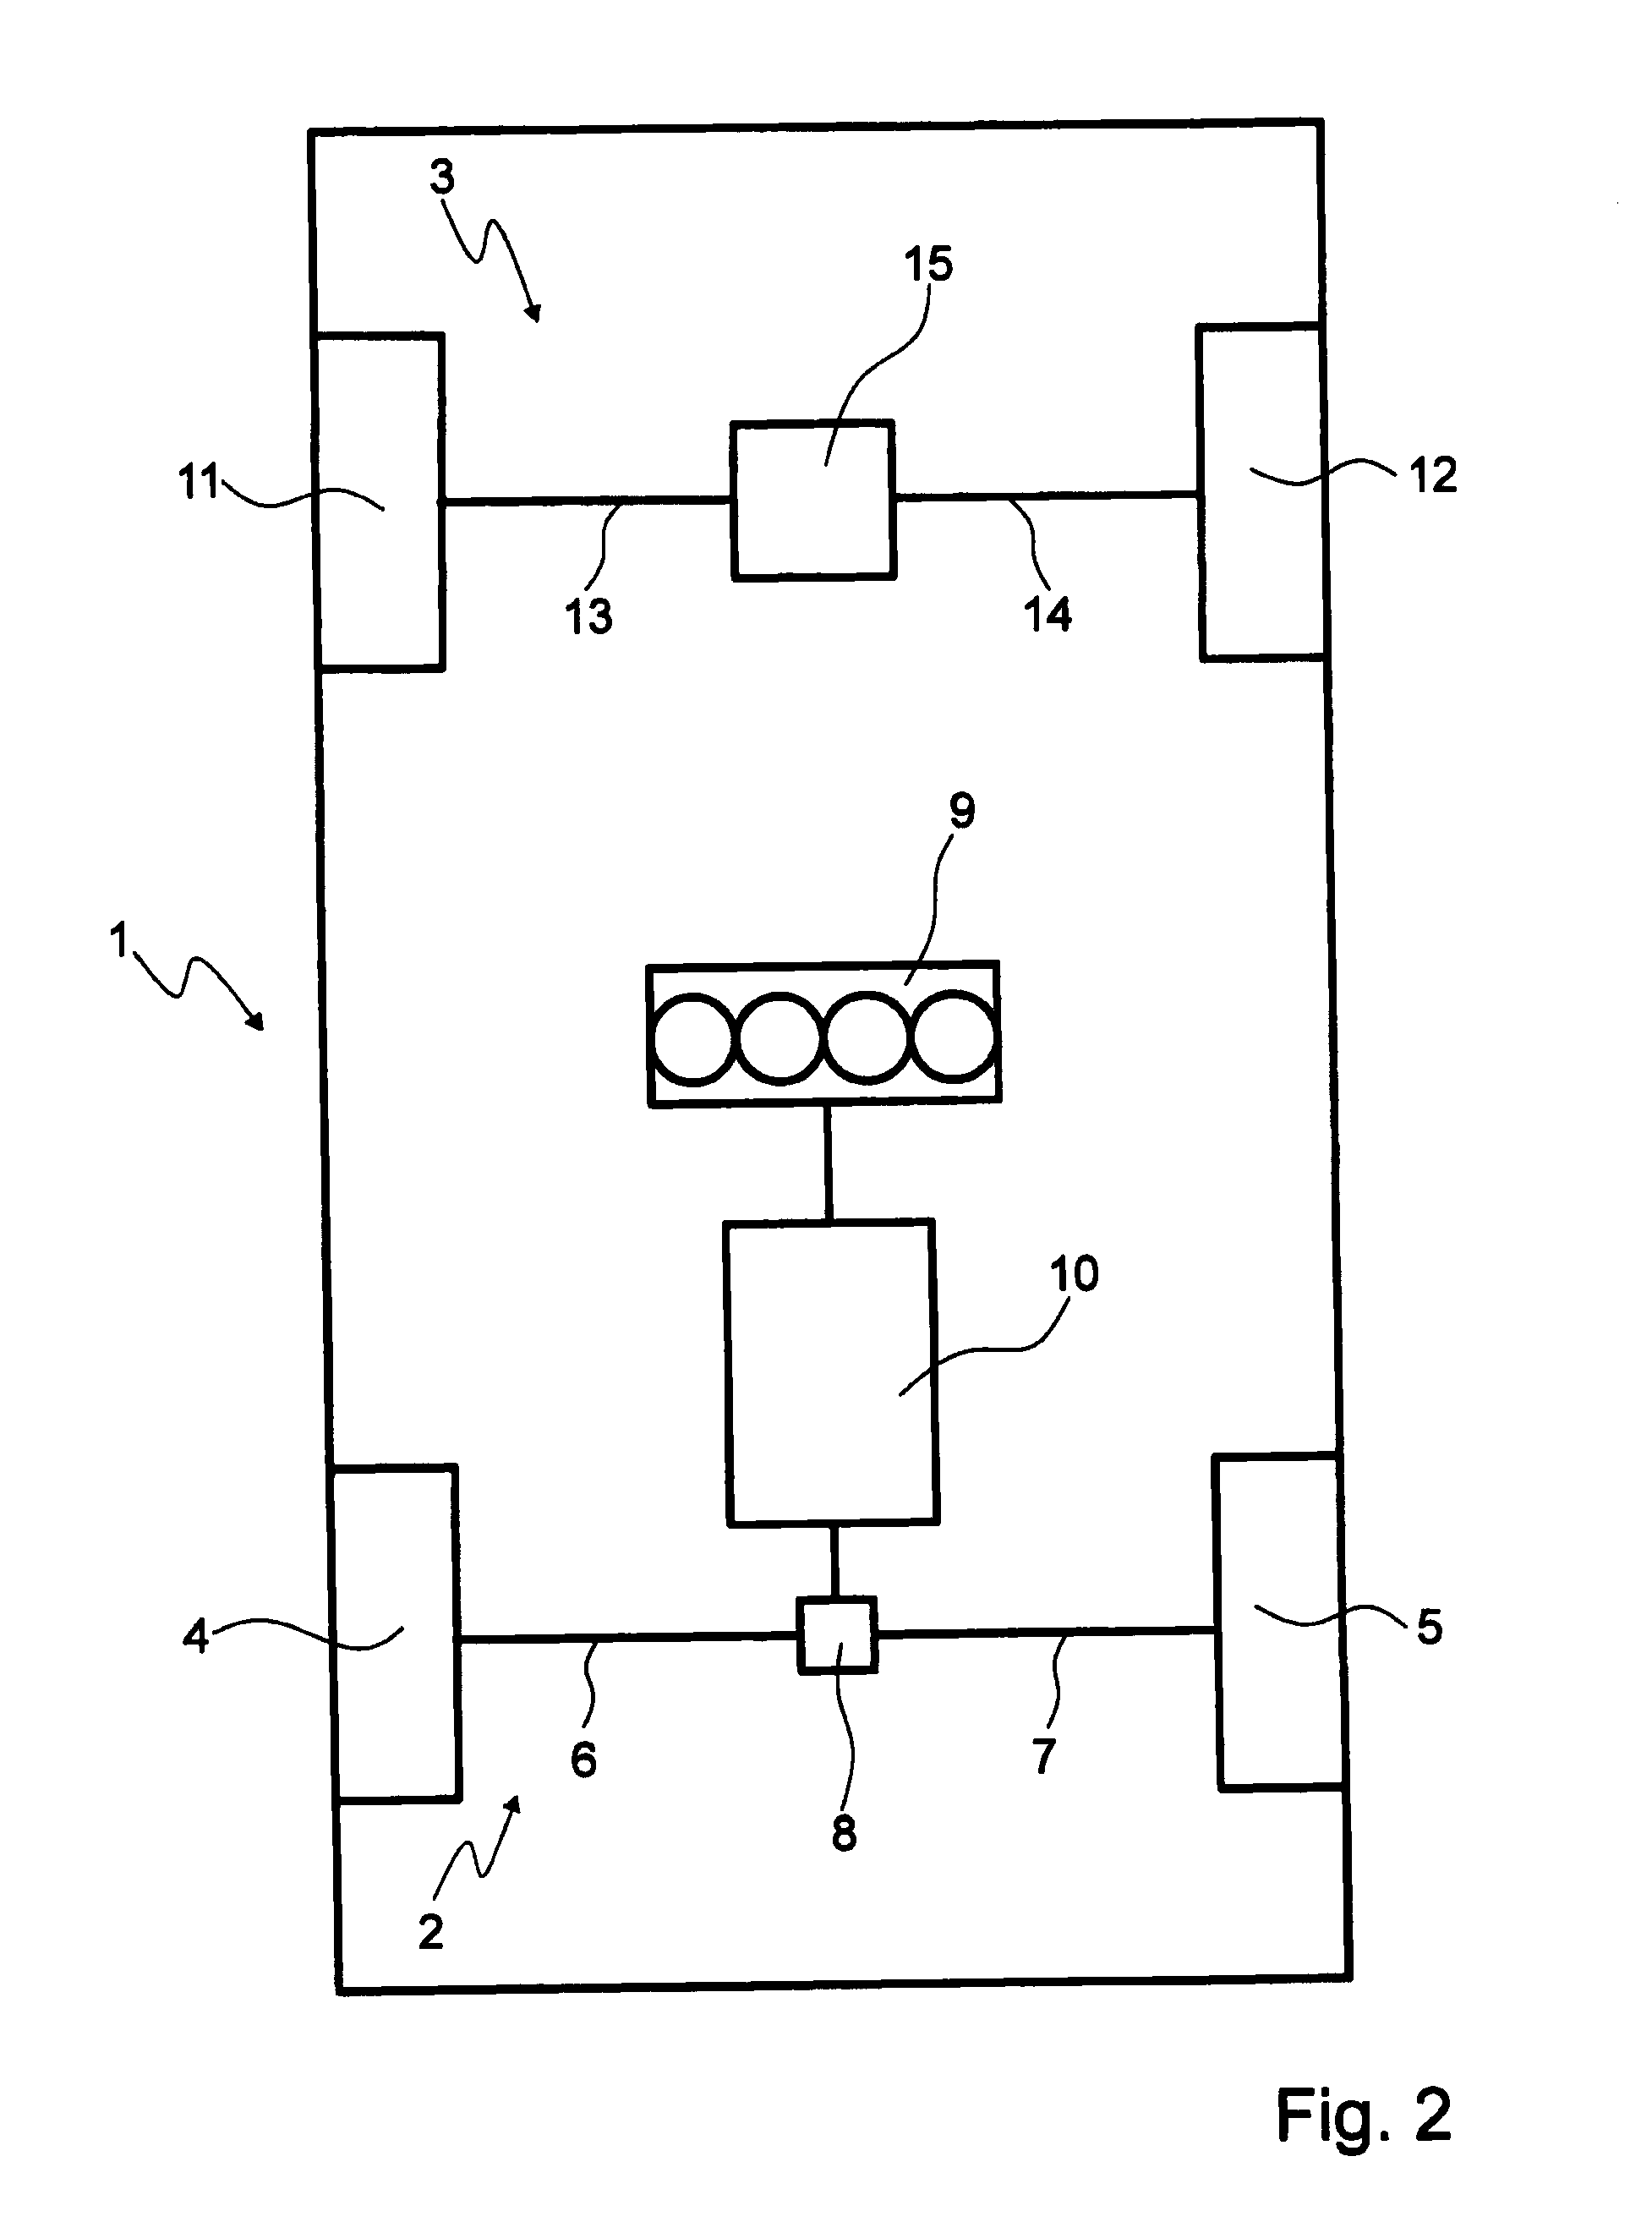 Transmission device comprising at least two output shafts